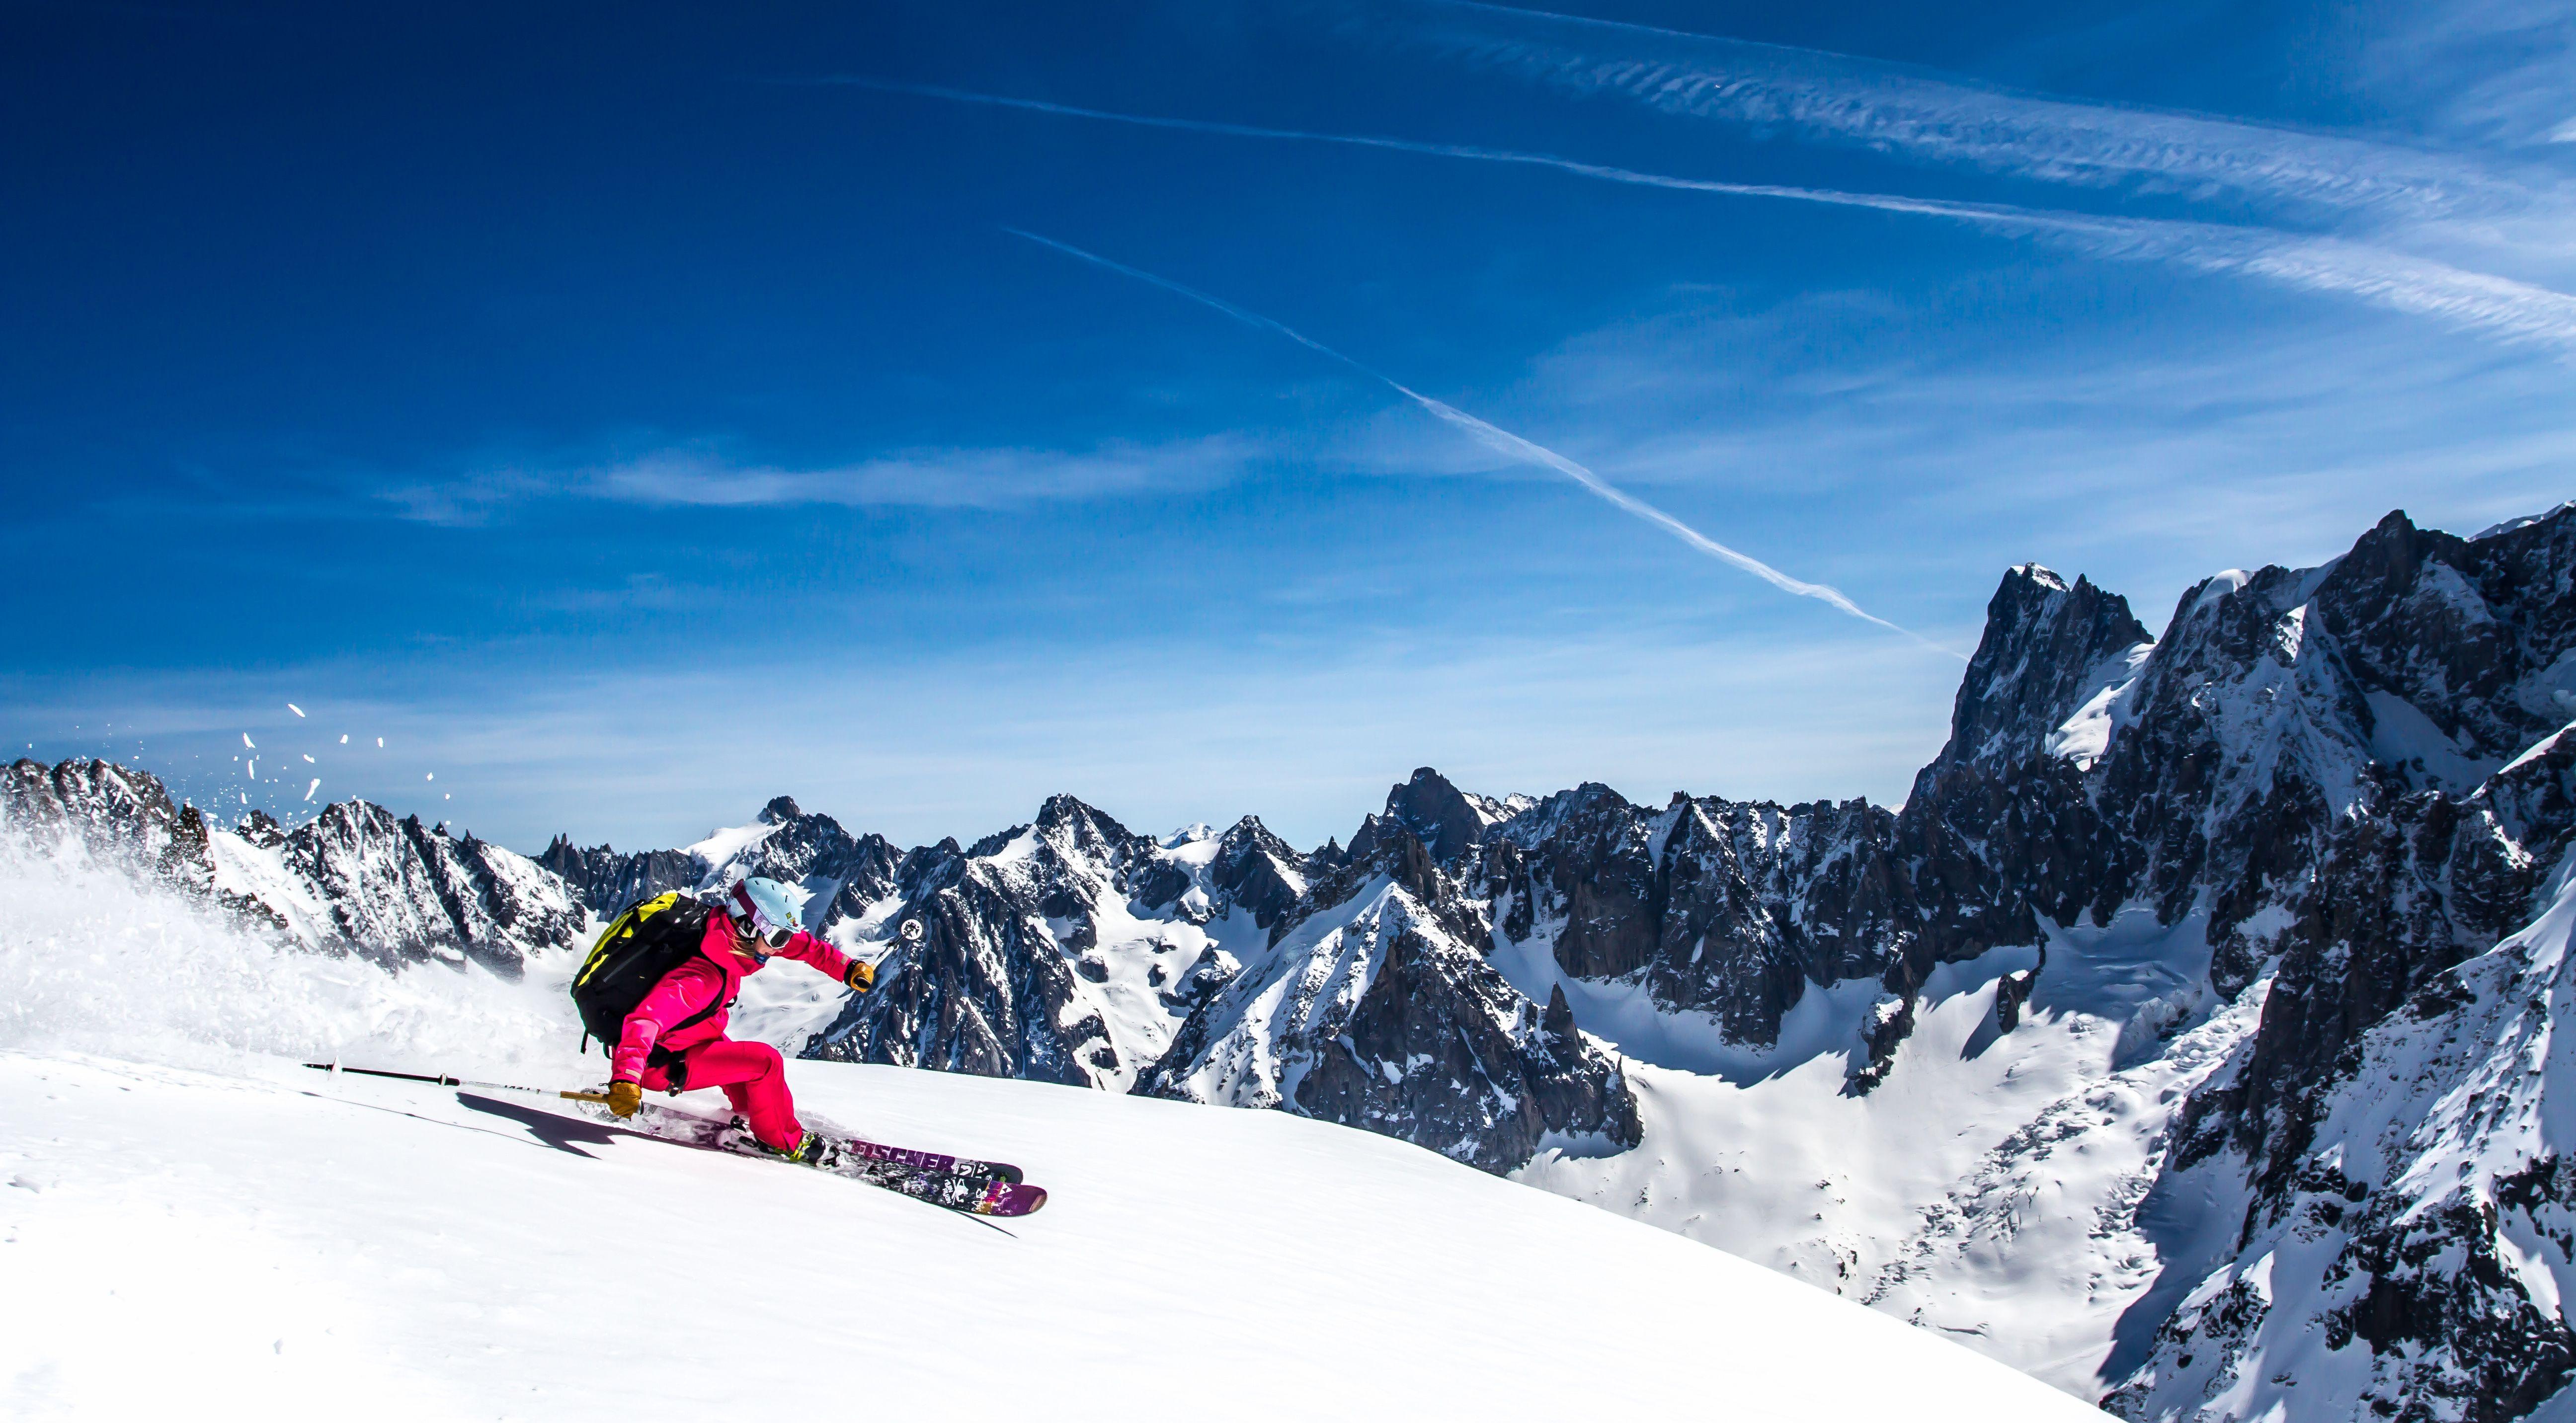 Skiing 4k Wallpapers Top Free Skiing 4k Backgrounds W - vrogue.co